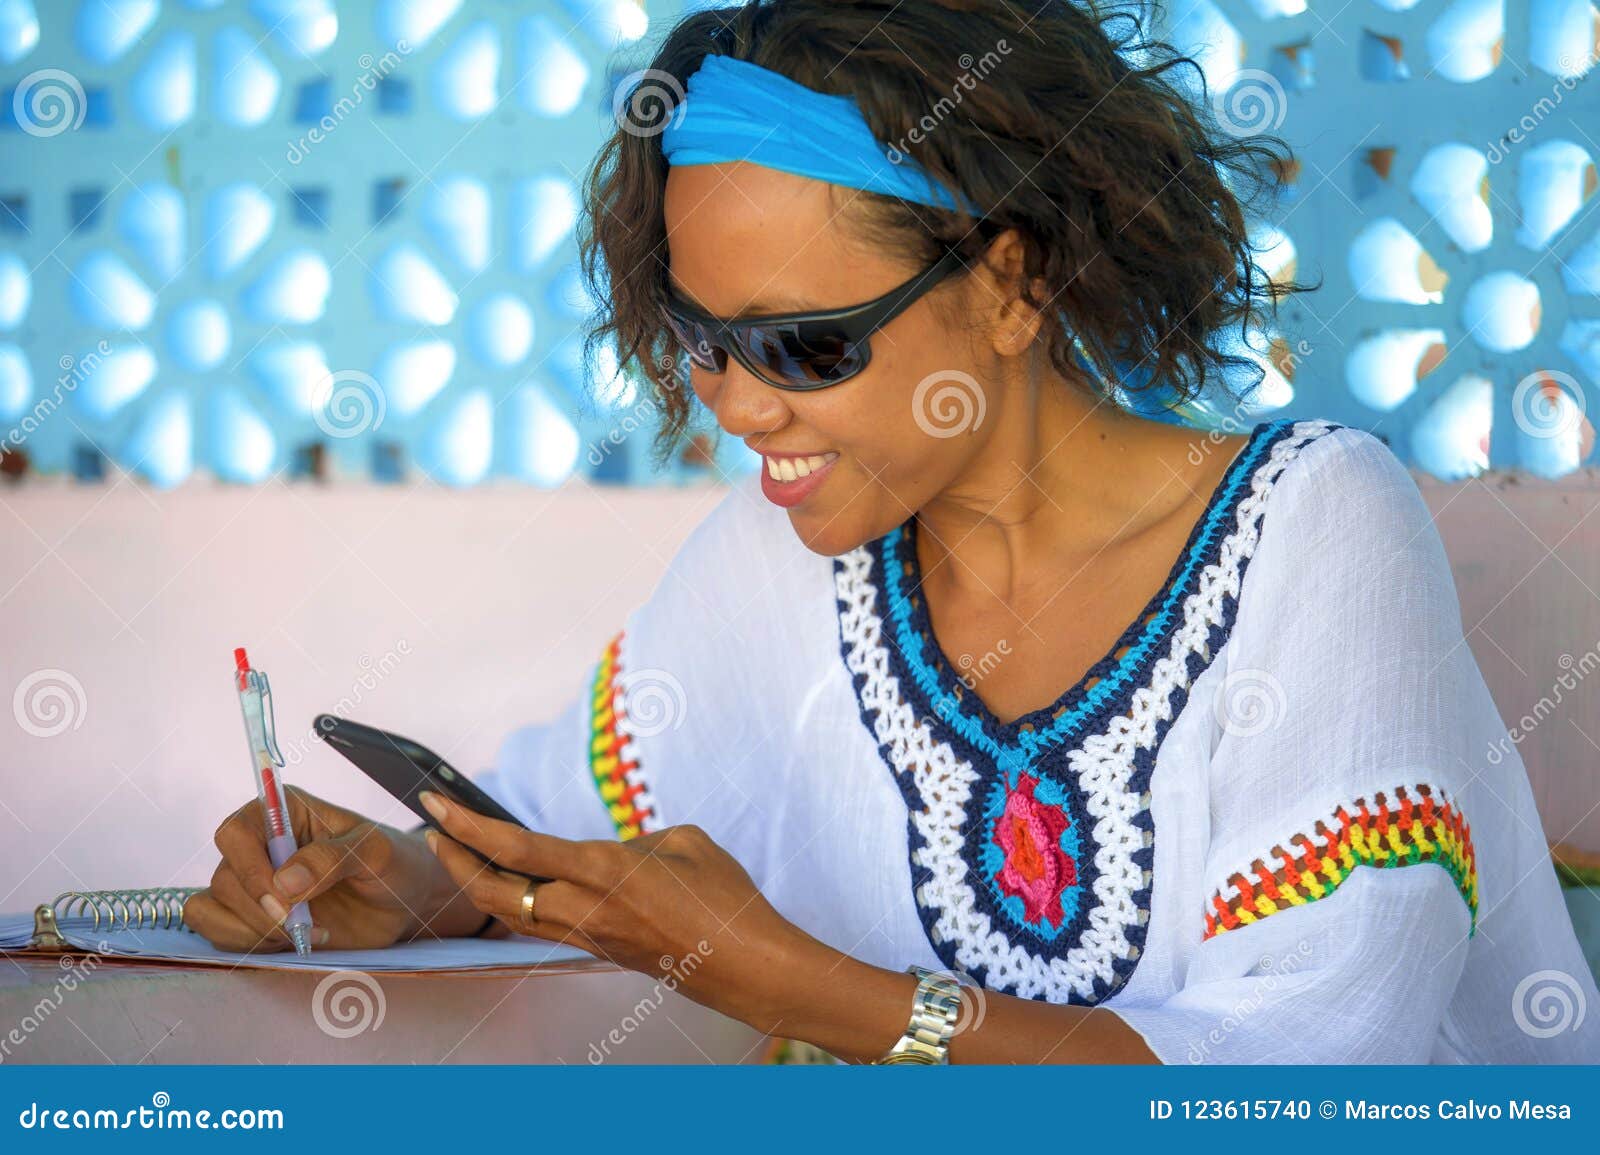 young attractive hipster and exotic looking girl happy and relaxed using internet social media working on mobile phone smiling tak